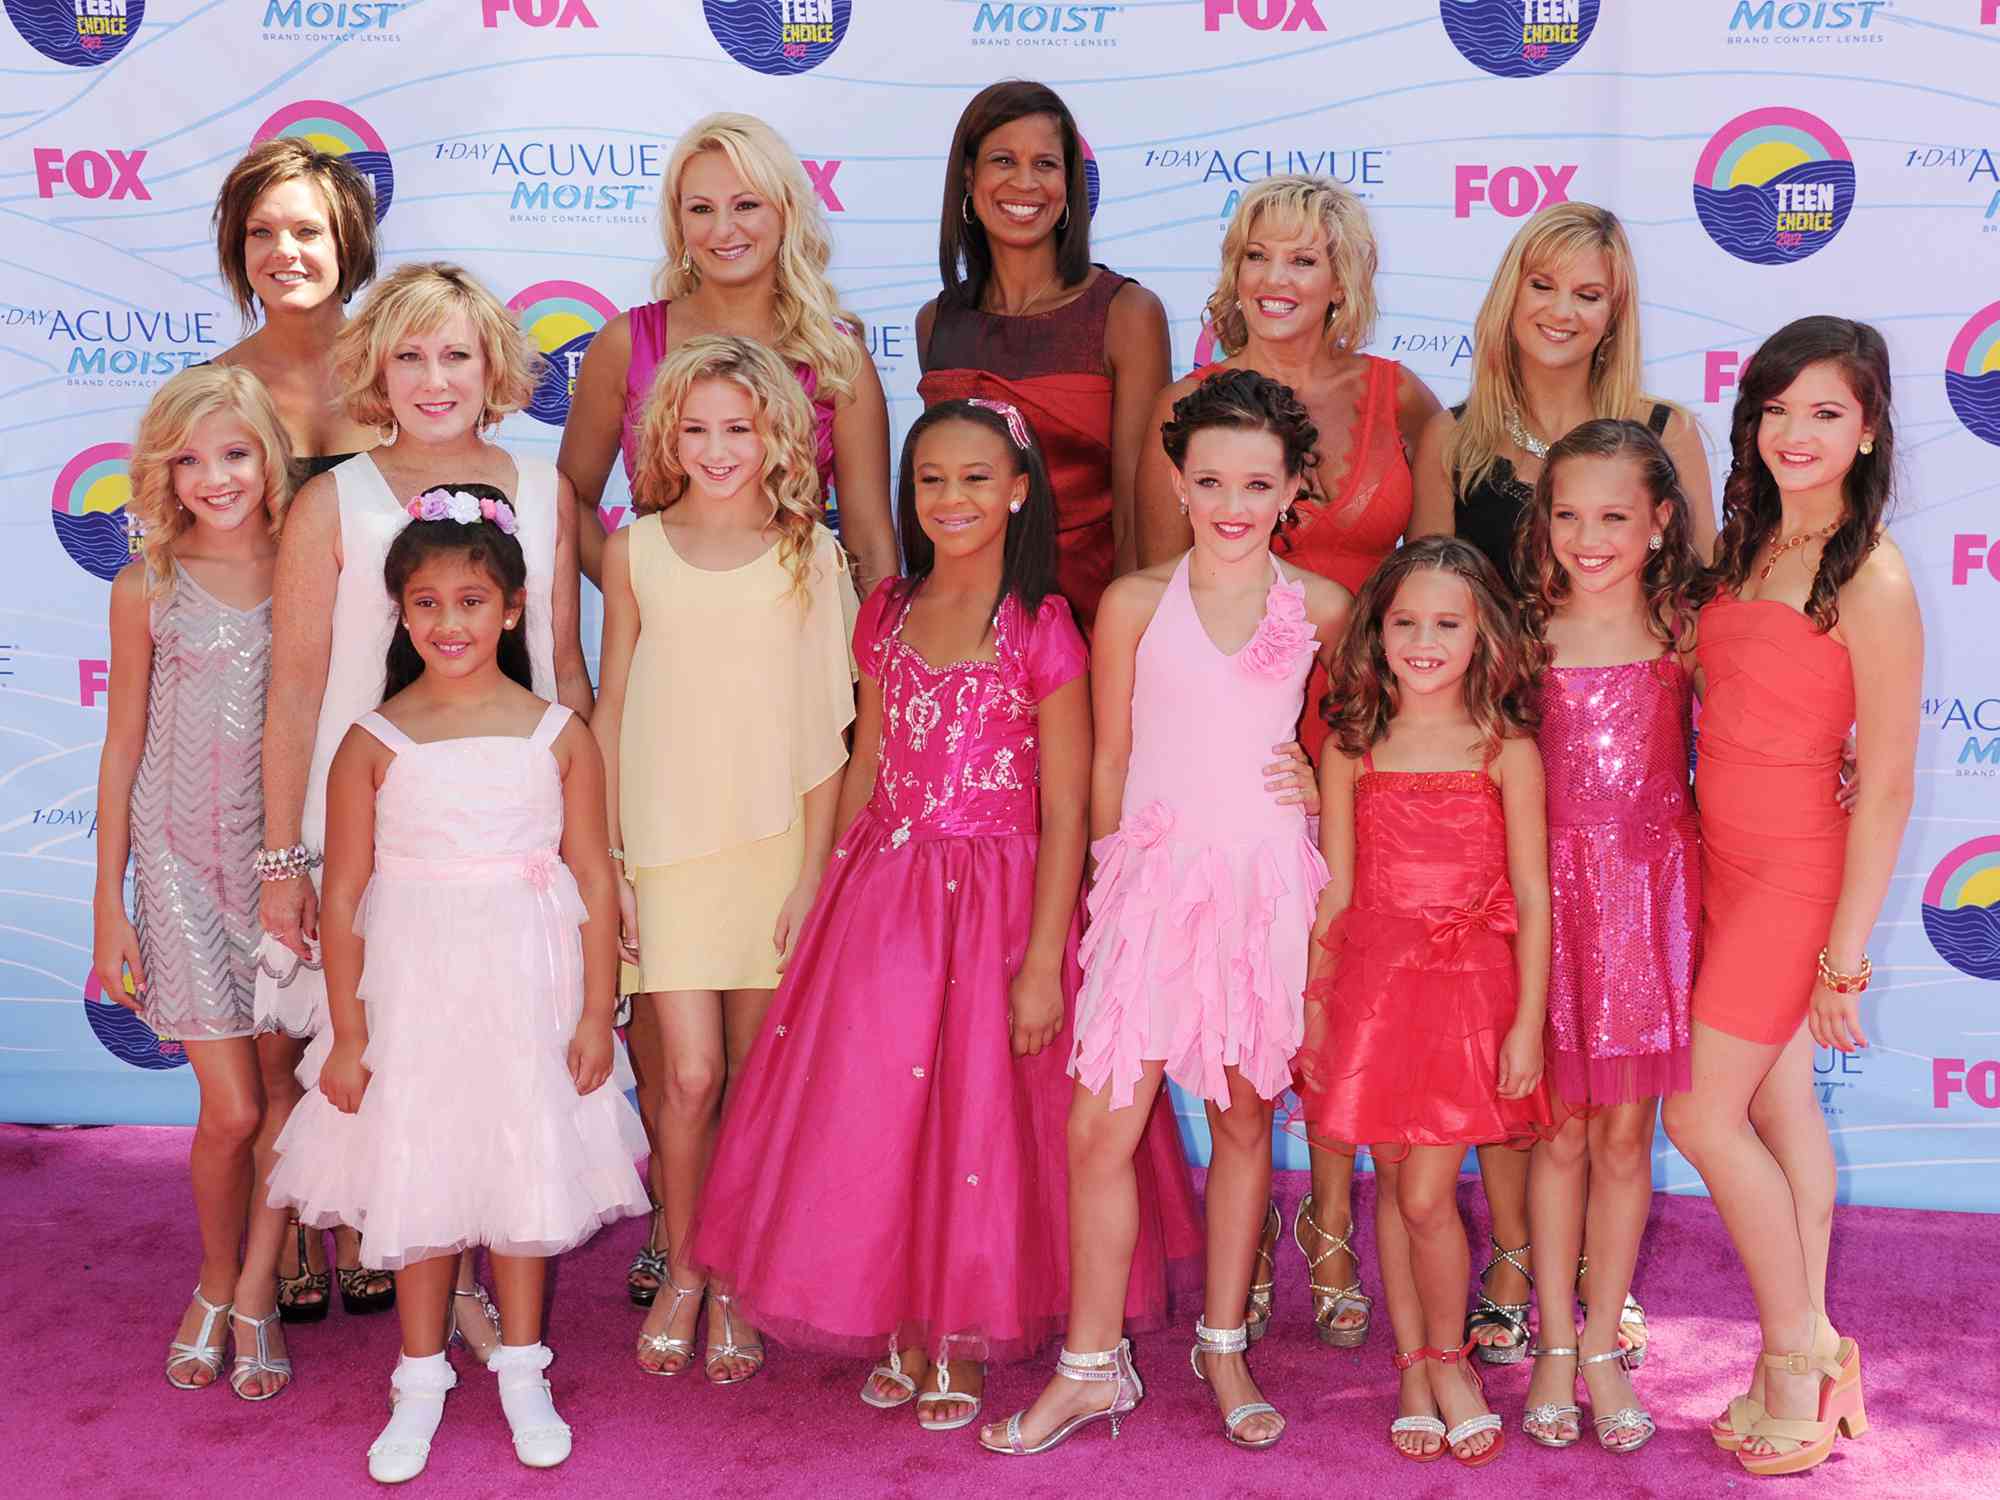 The Cast of “Dance Moms”: What the Stars Are Up to Now — And Where They Stand With Abby Lee Miller